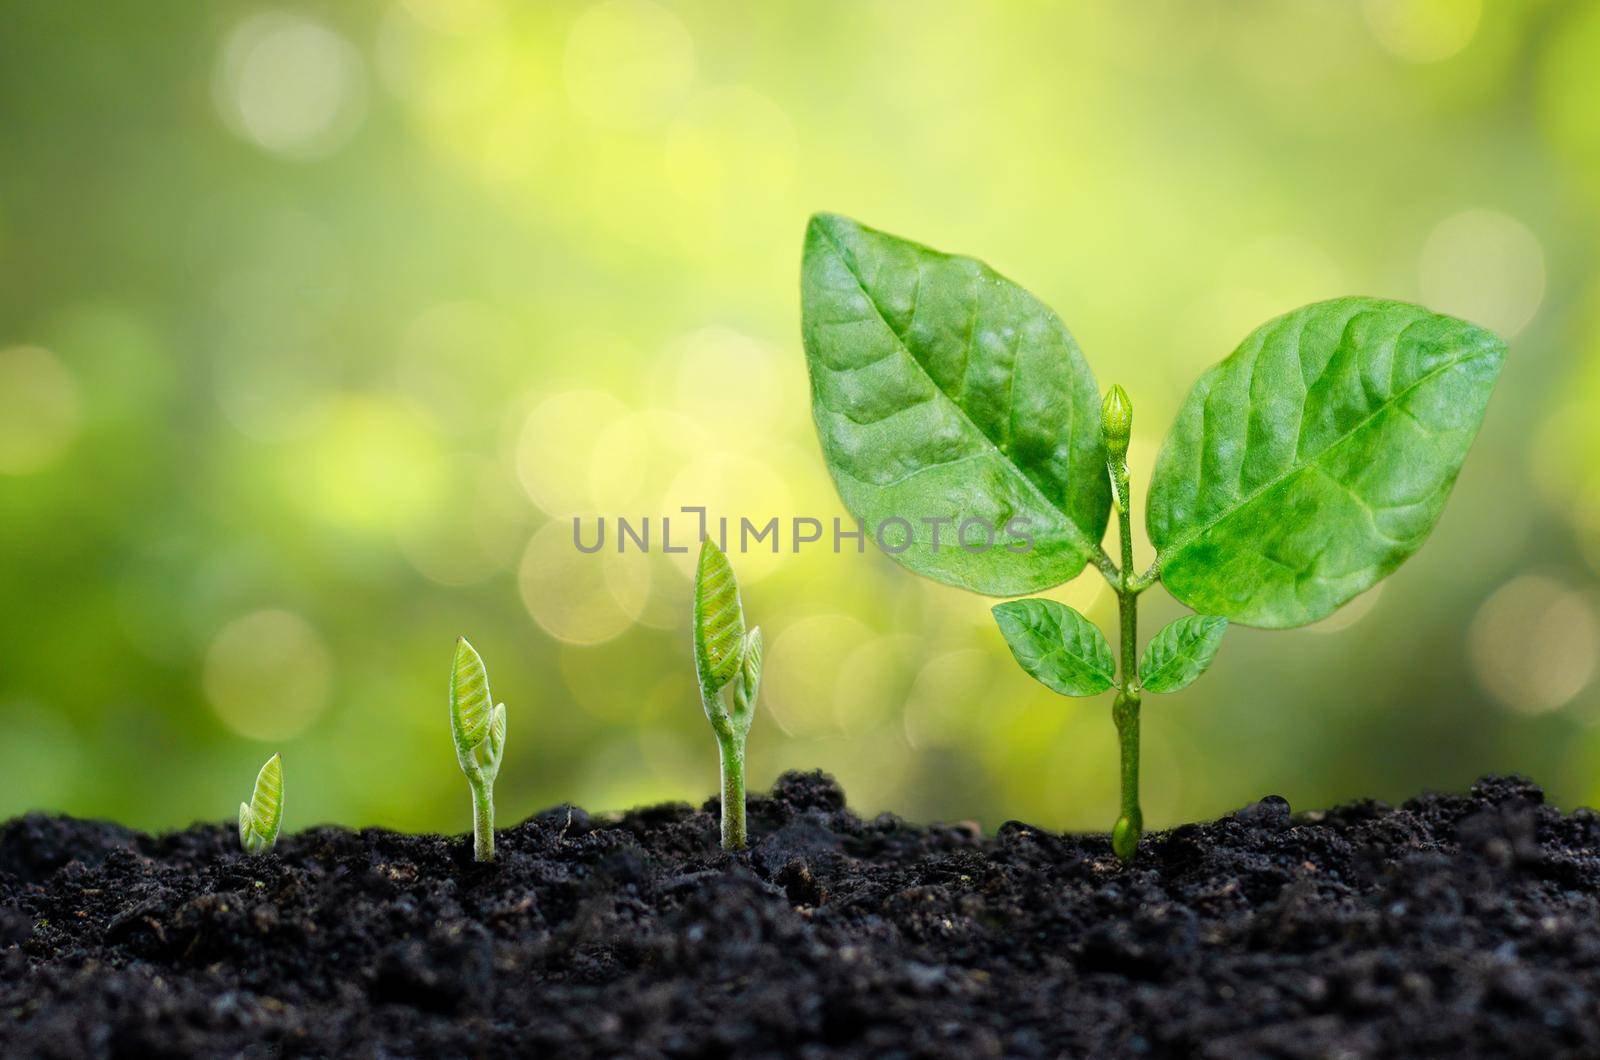 tree sapling hand planting sprout in soil with sunset close up male hand planting young tree over green background